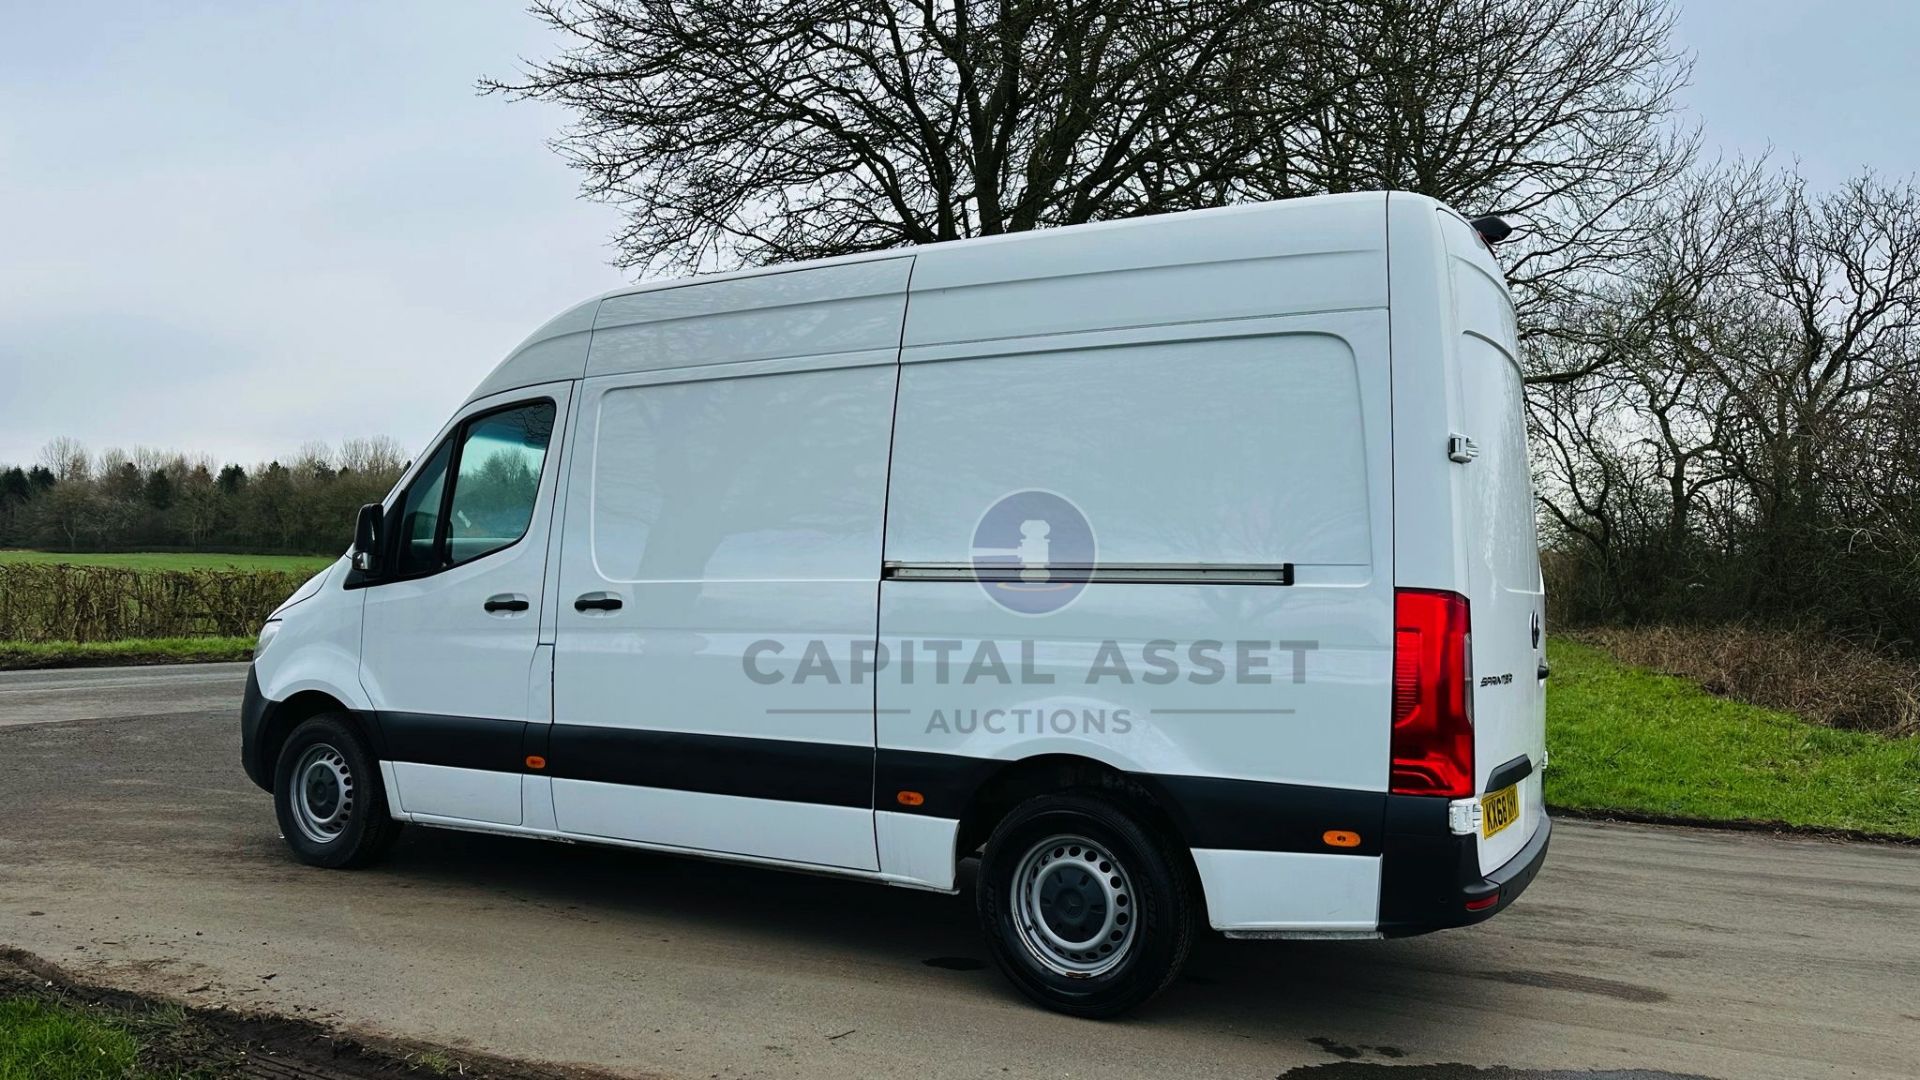 MERCEDES-BENZ SPRINTER 314 CDI *MWB - REFRIGERATED VAN* (2019 - FACELIFT MODEL) *OVERNIGHT STANDBY* - Image 11 of 41